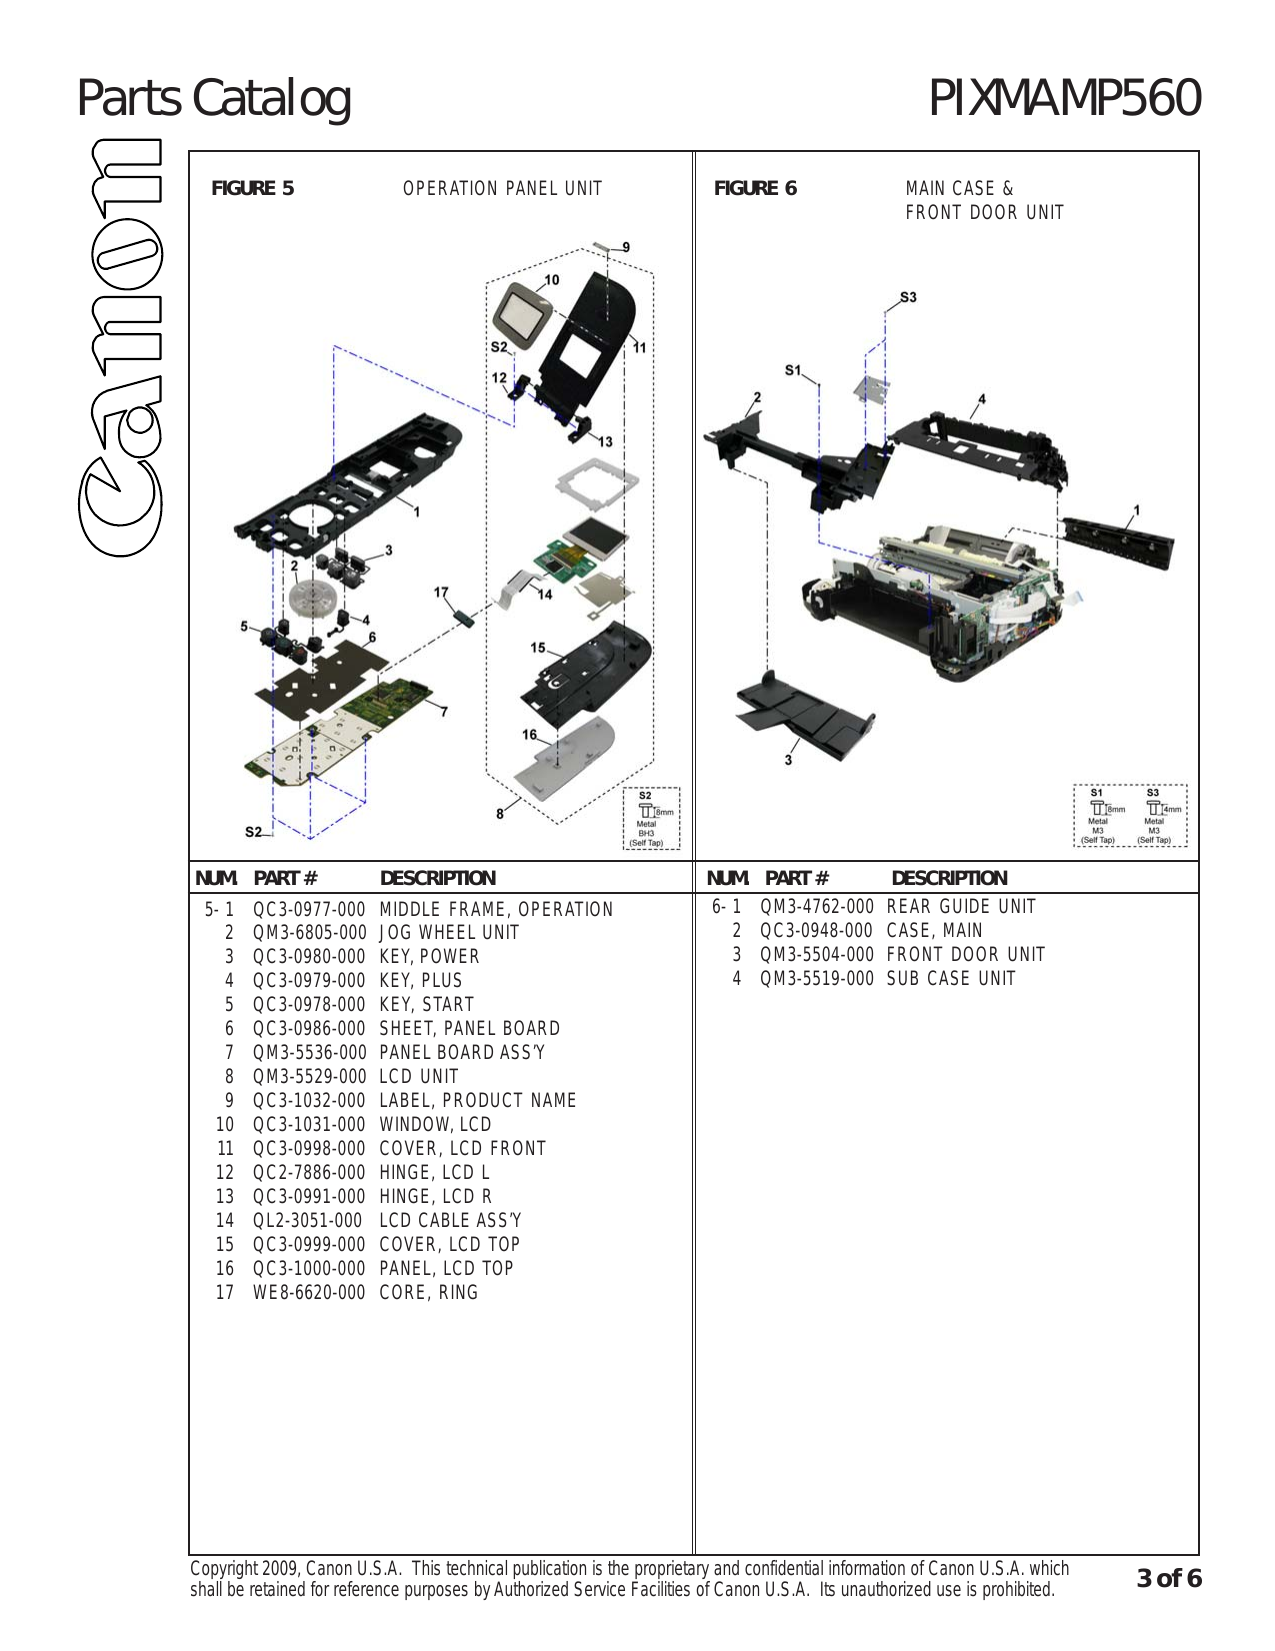 Canon Pixma MP560 all-in-one inkjet printer parts catalog Preview image 4